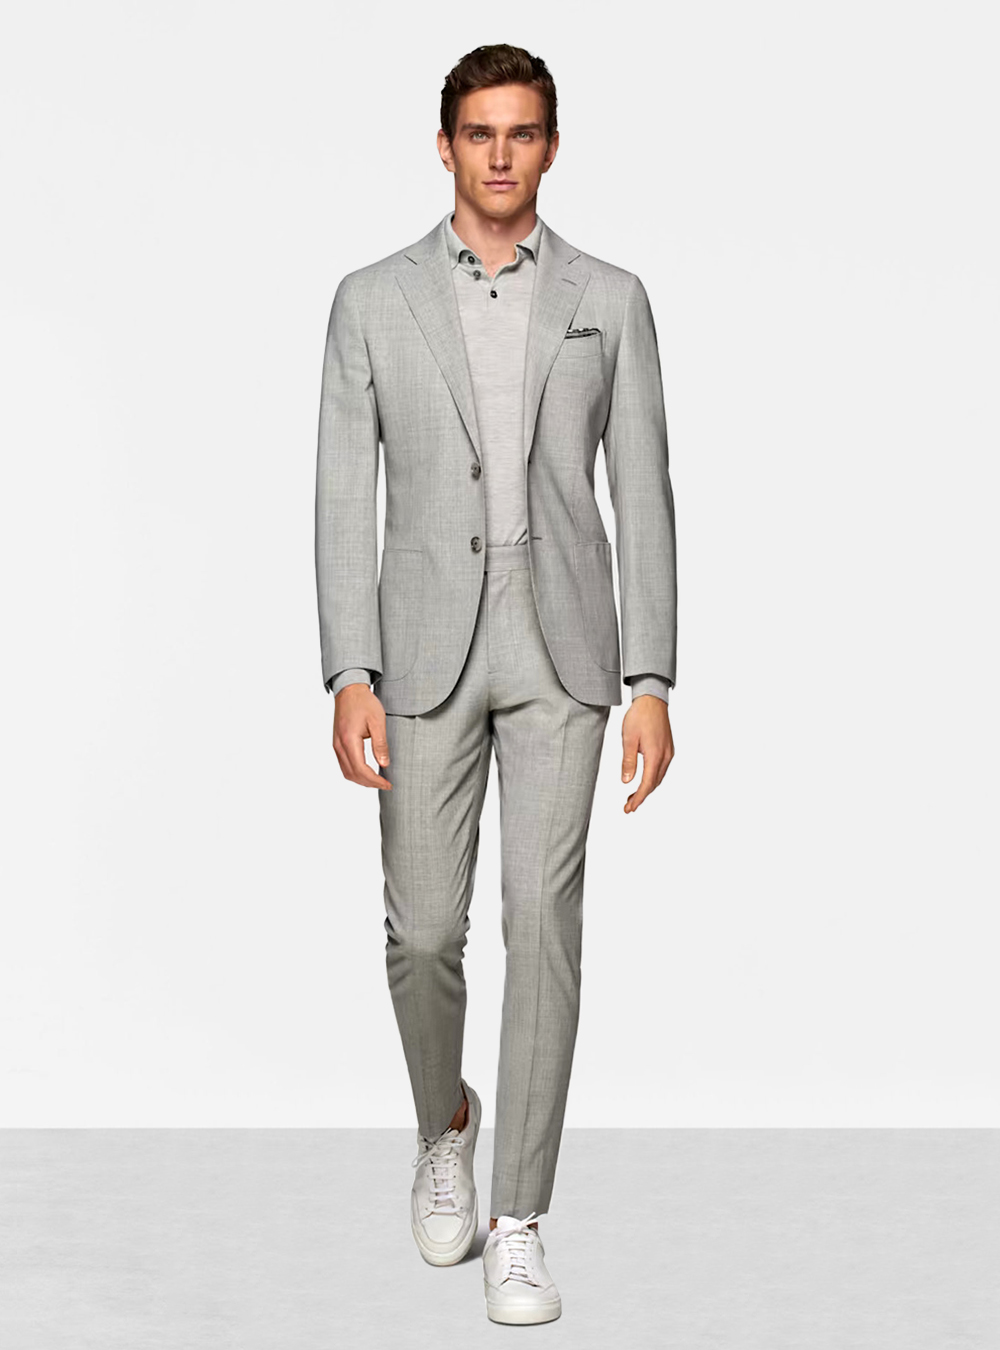 grey suit, grey polo shirt, and white sneakers